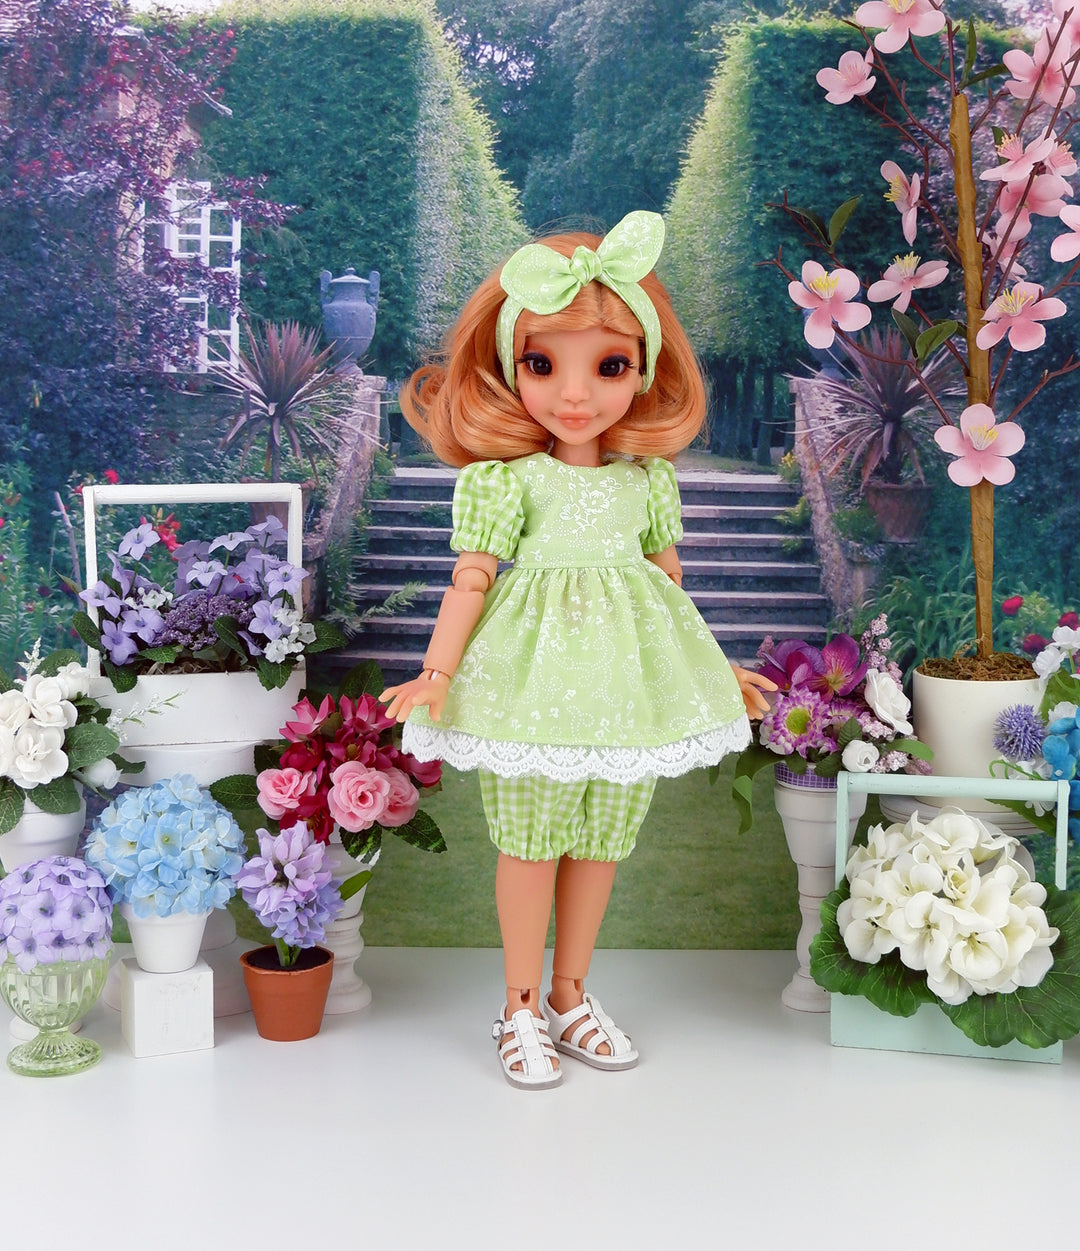 Spring Garden - top & bloomers with shoes for Ava BJD doll